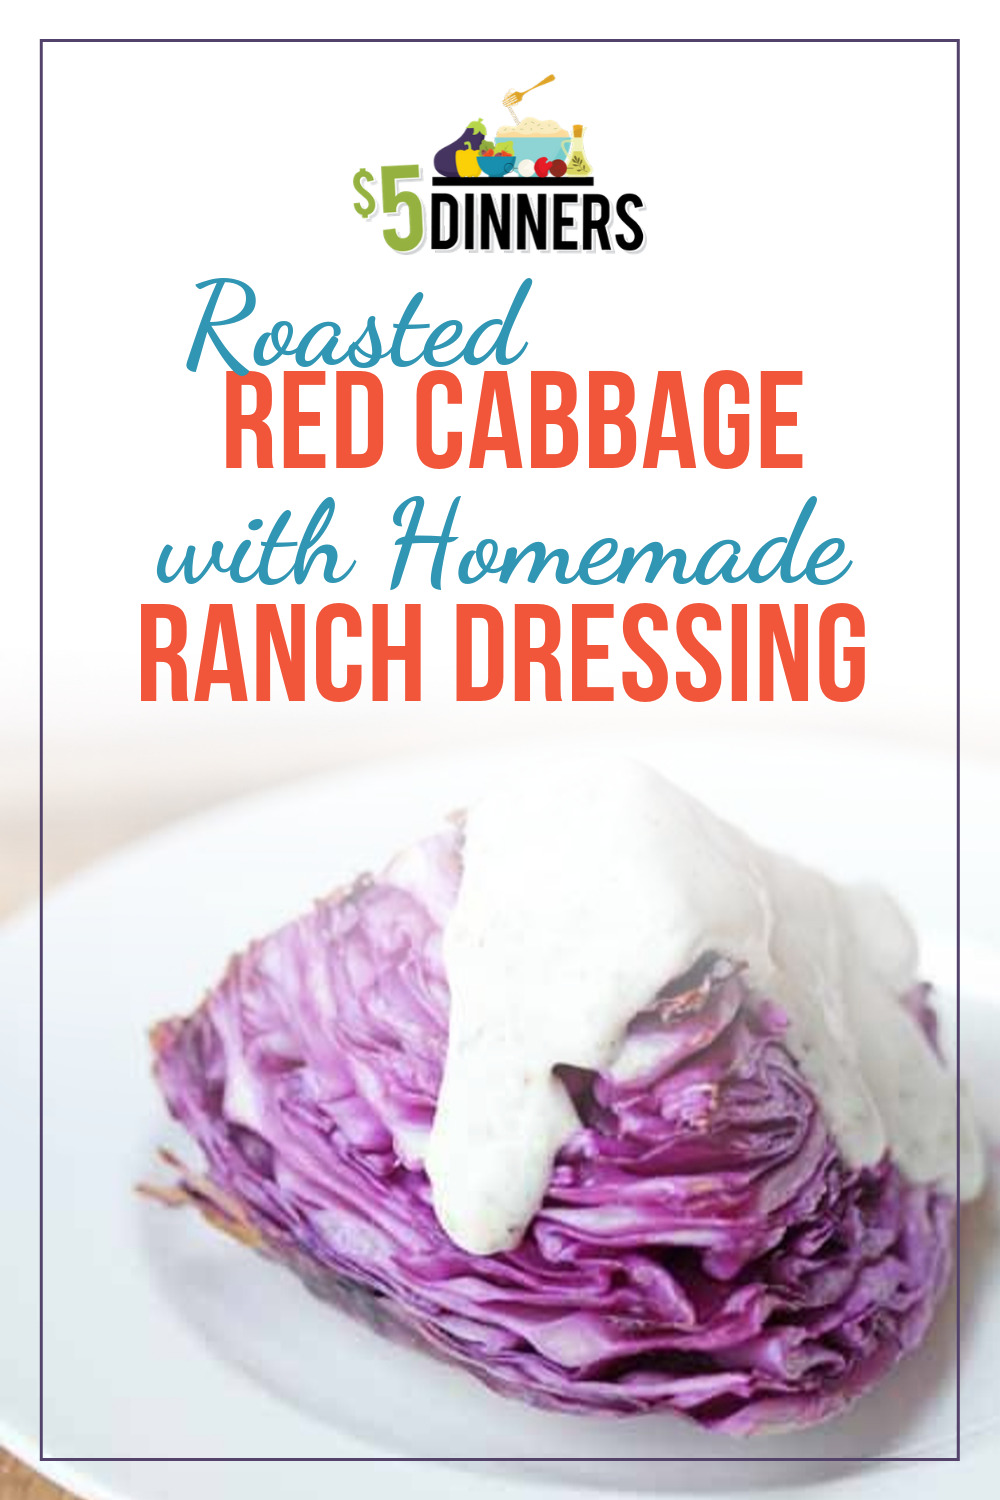 roasted red cabbage recipe